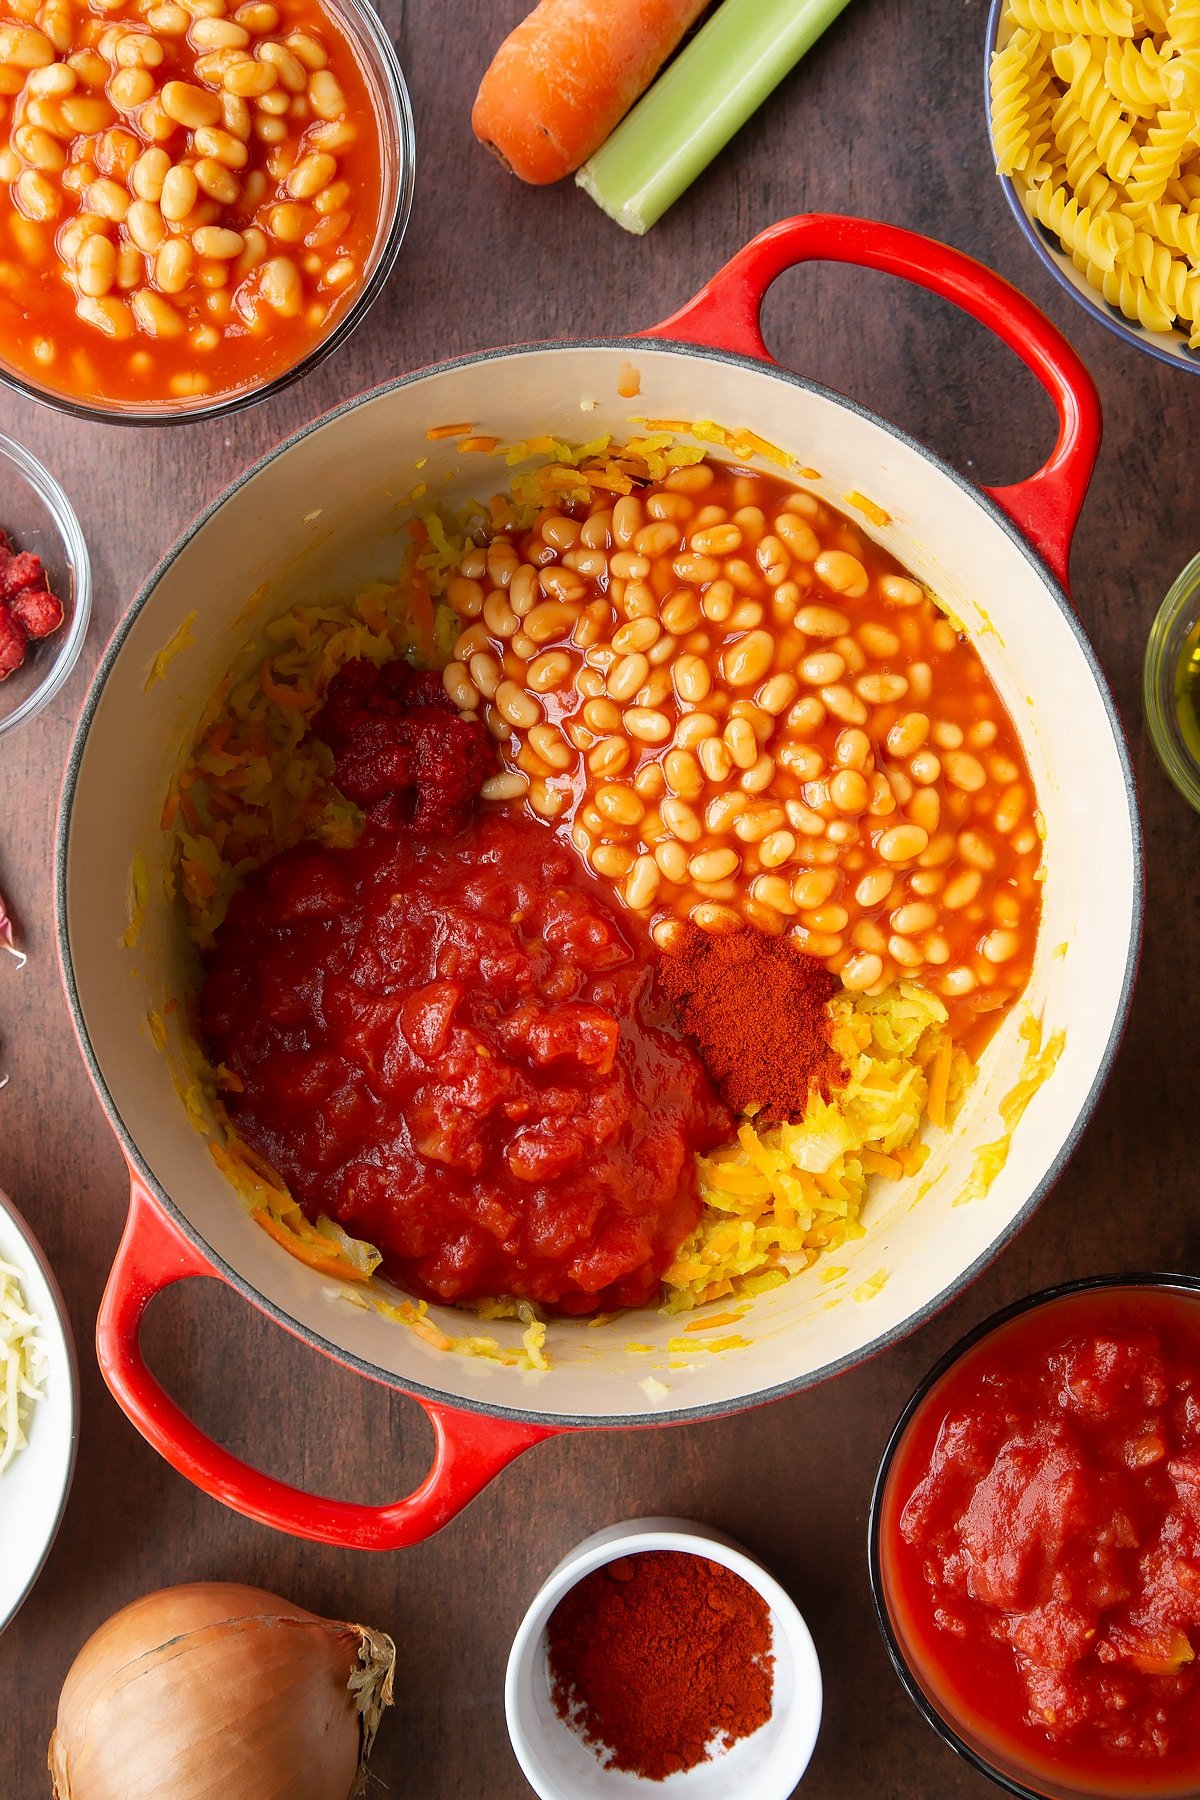 Fried grated veg in a saucepan with beans, tomatoes, tomato puree, paprika on top. Ingredients to make pasta and baked beans surround the pan.